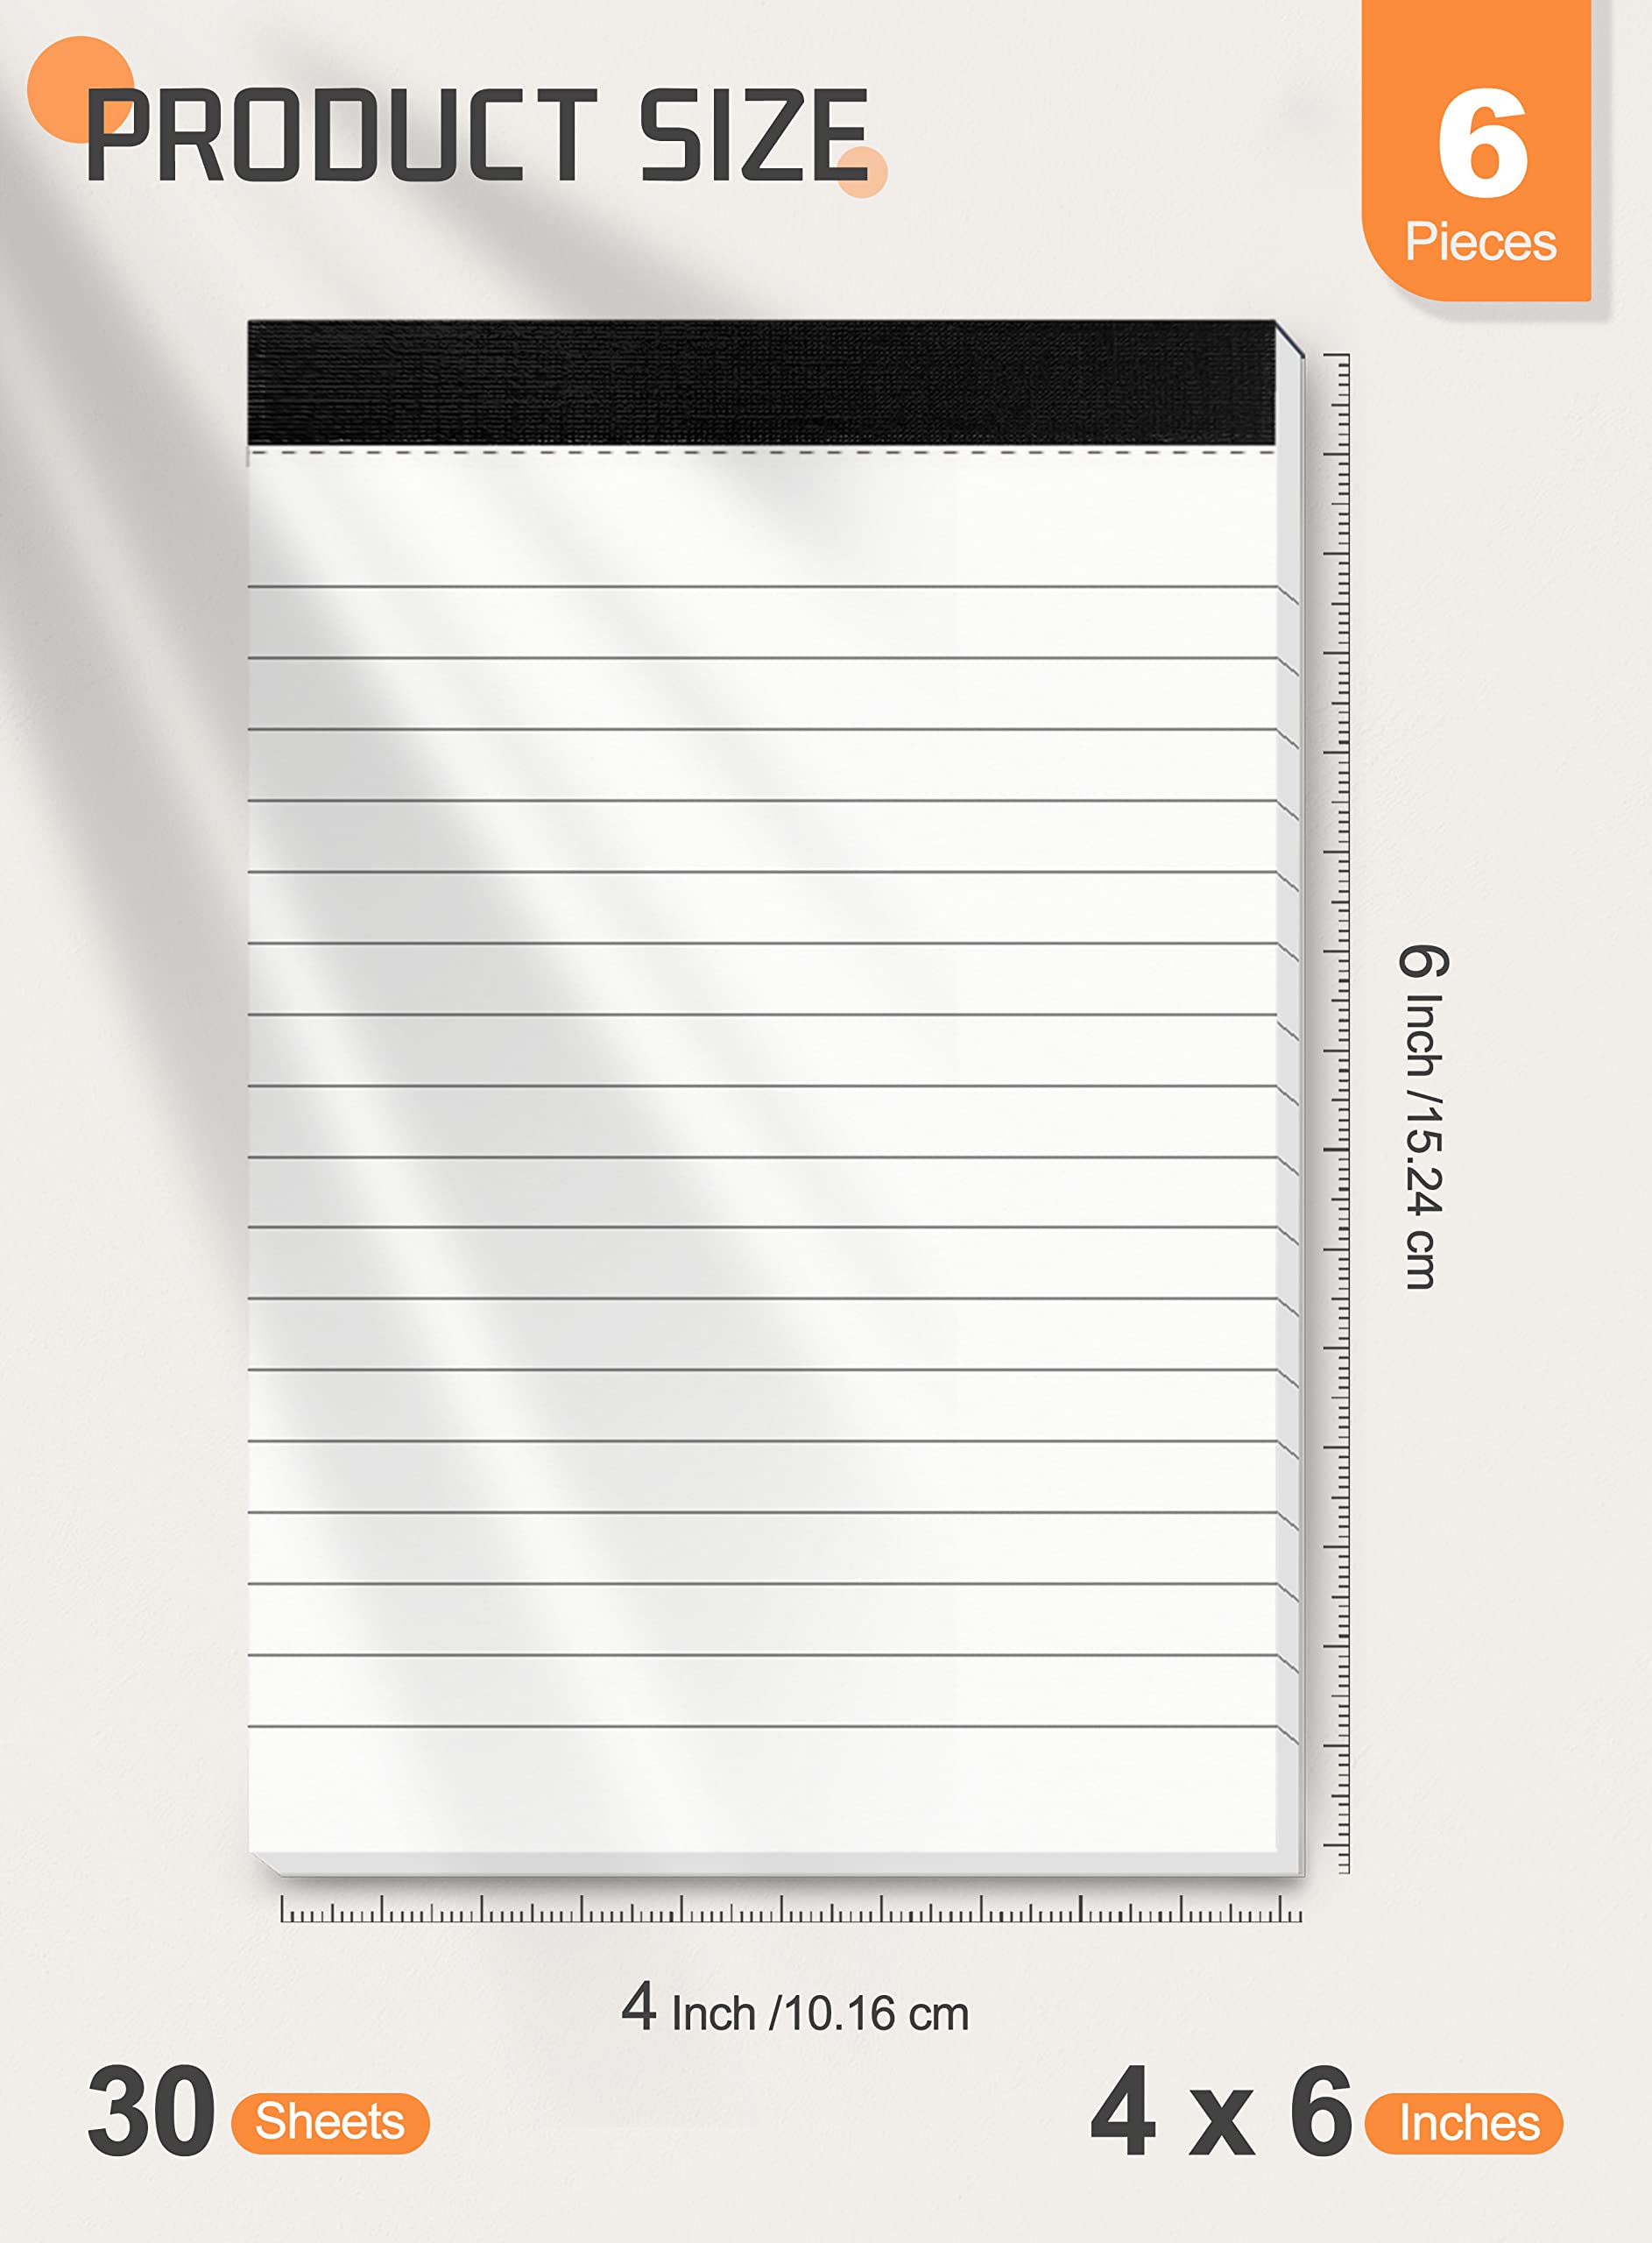 A6 Small Notepads for Office 6 Pack 4 x 6 In Pocket Note Pad for Reminders and Notes Writing Pads of Work Memo Pads Lined Paper for Home Note Pads for Household To Do List Scratch Pads 30 Sheets Each